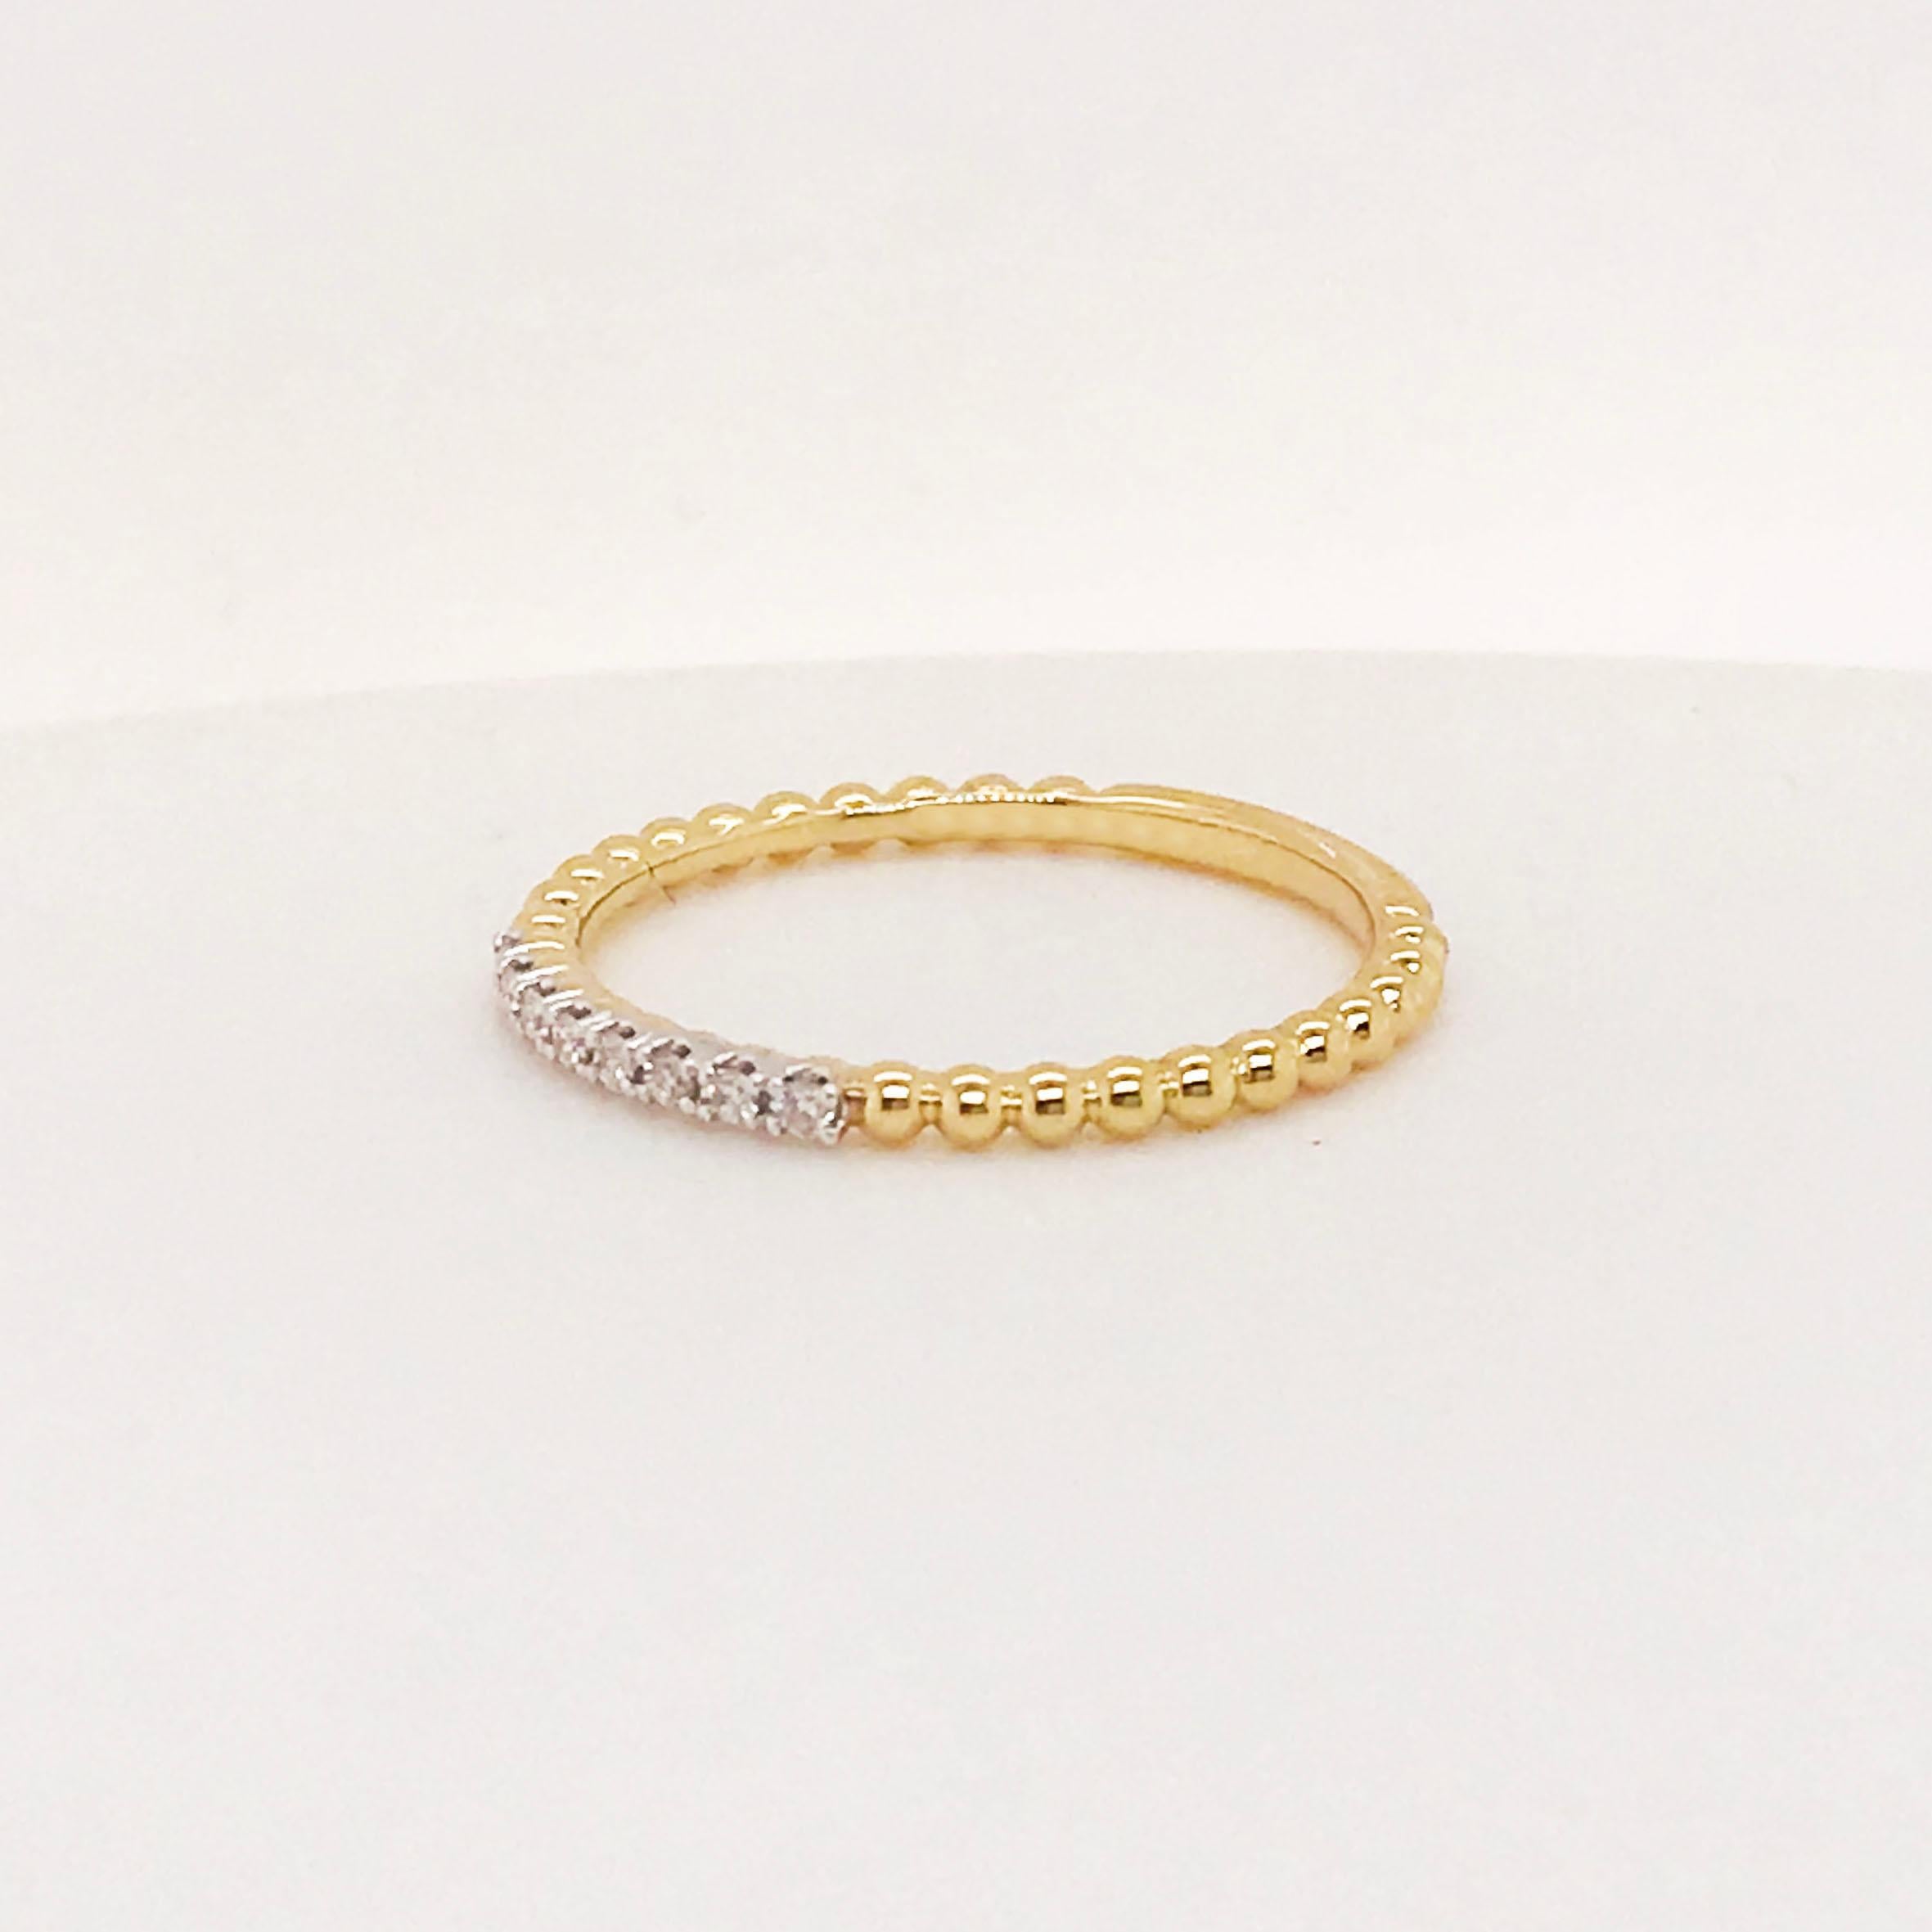 This modern, dainty diamond band is the perfect additional to any stackable ring collection! With genuine, natural round brilliant diamonds set across the top in a sweet setting. The diamonds are top quality and add sparkle and character to the